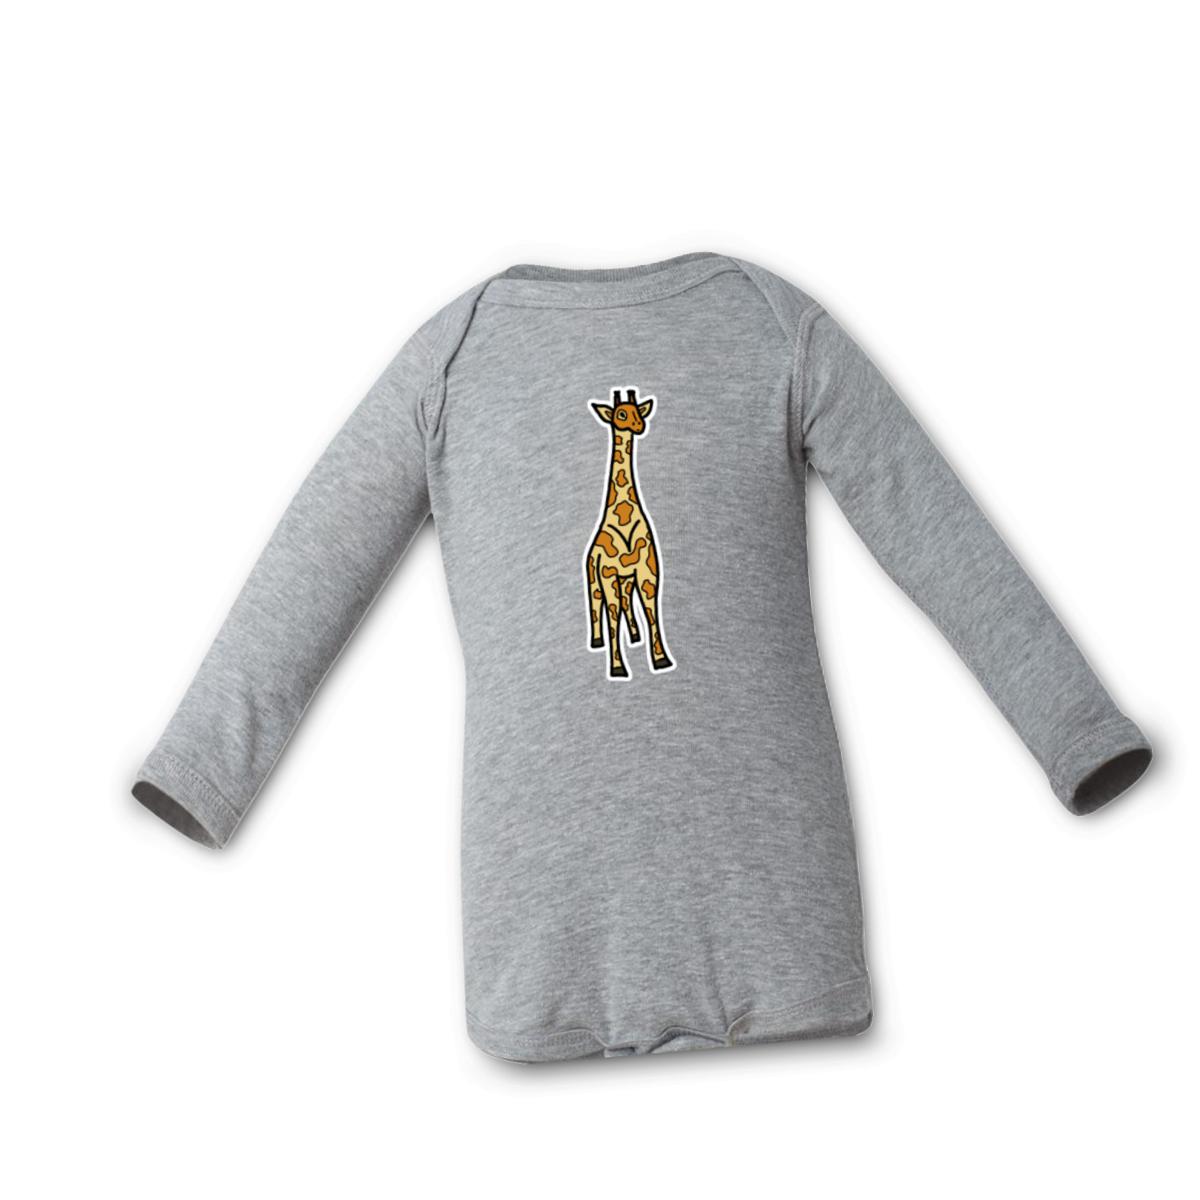 by Toddler Tales Available in 0-18 months sizes Giraffe Full Sleeves Bodysuit